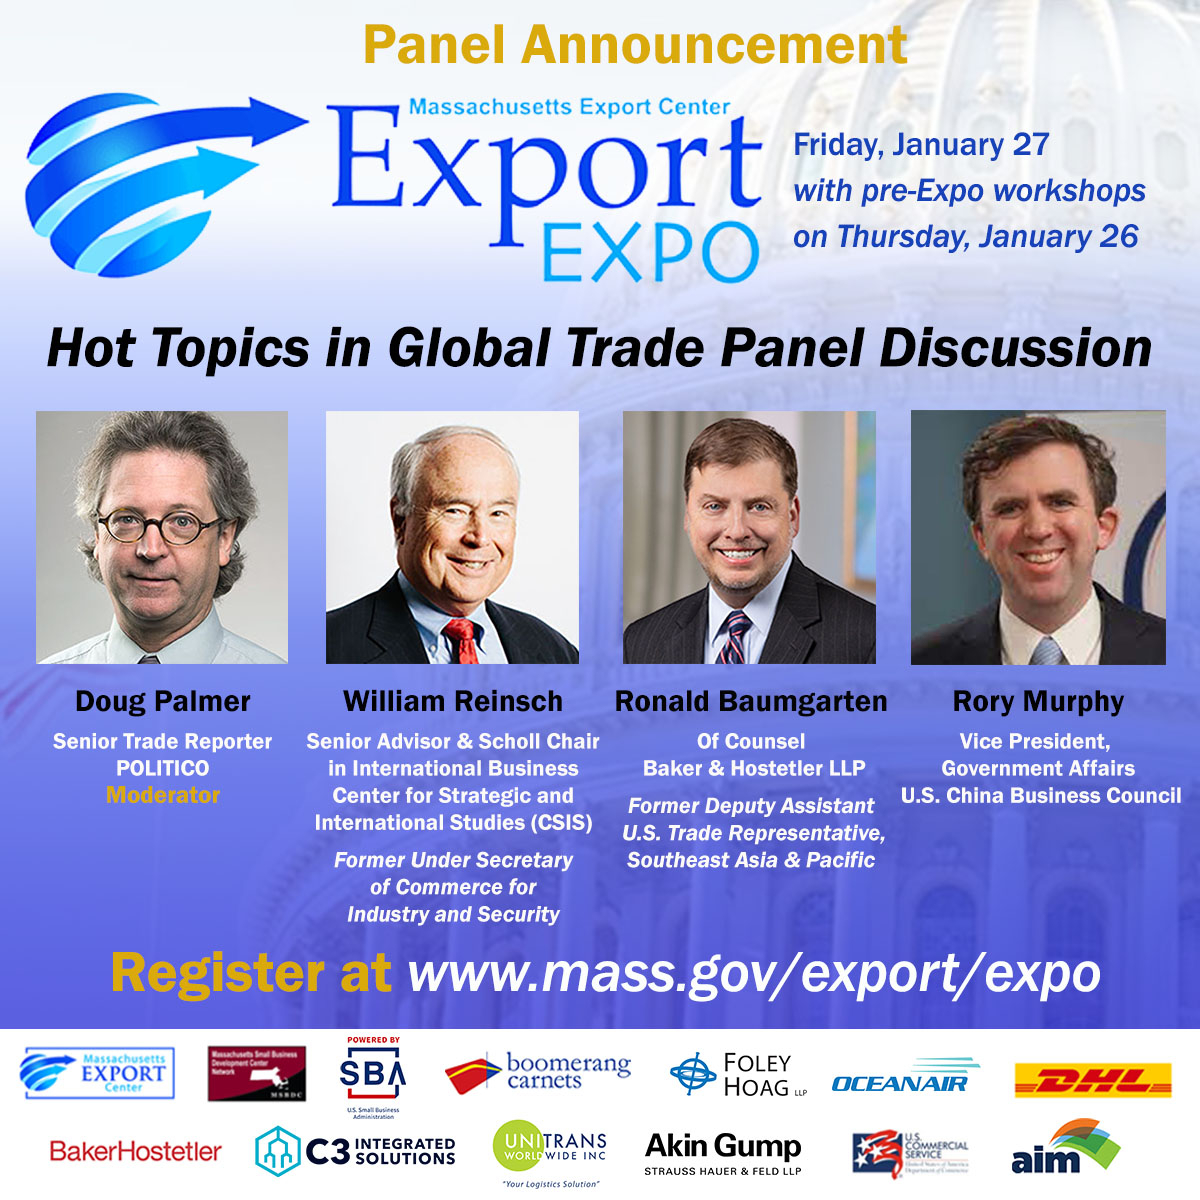 We are pleased to announce the panelists for the Hot Topics in Global Trade Panel at next week’s #ExportExpo! Learn More at mass.gov/export/expo/